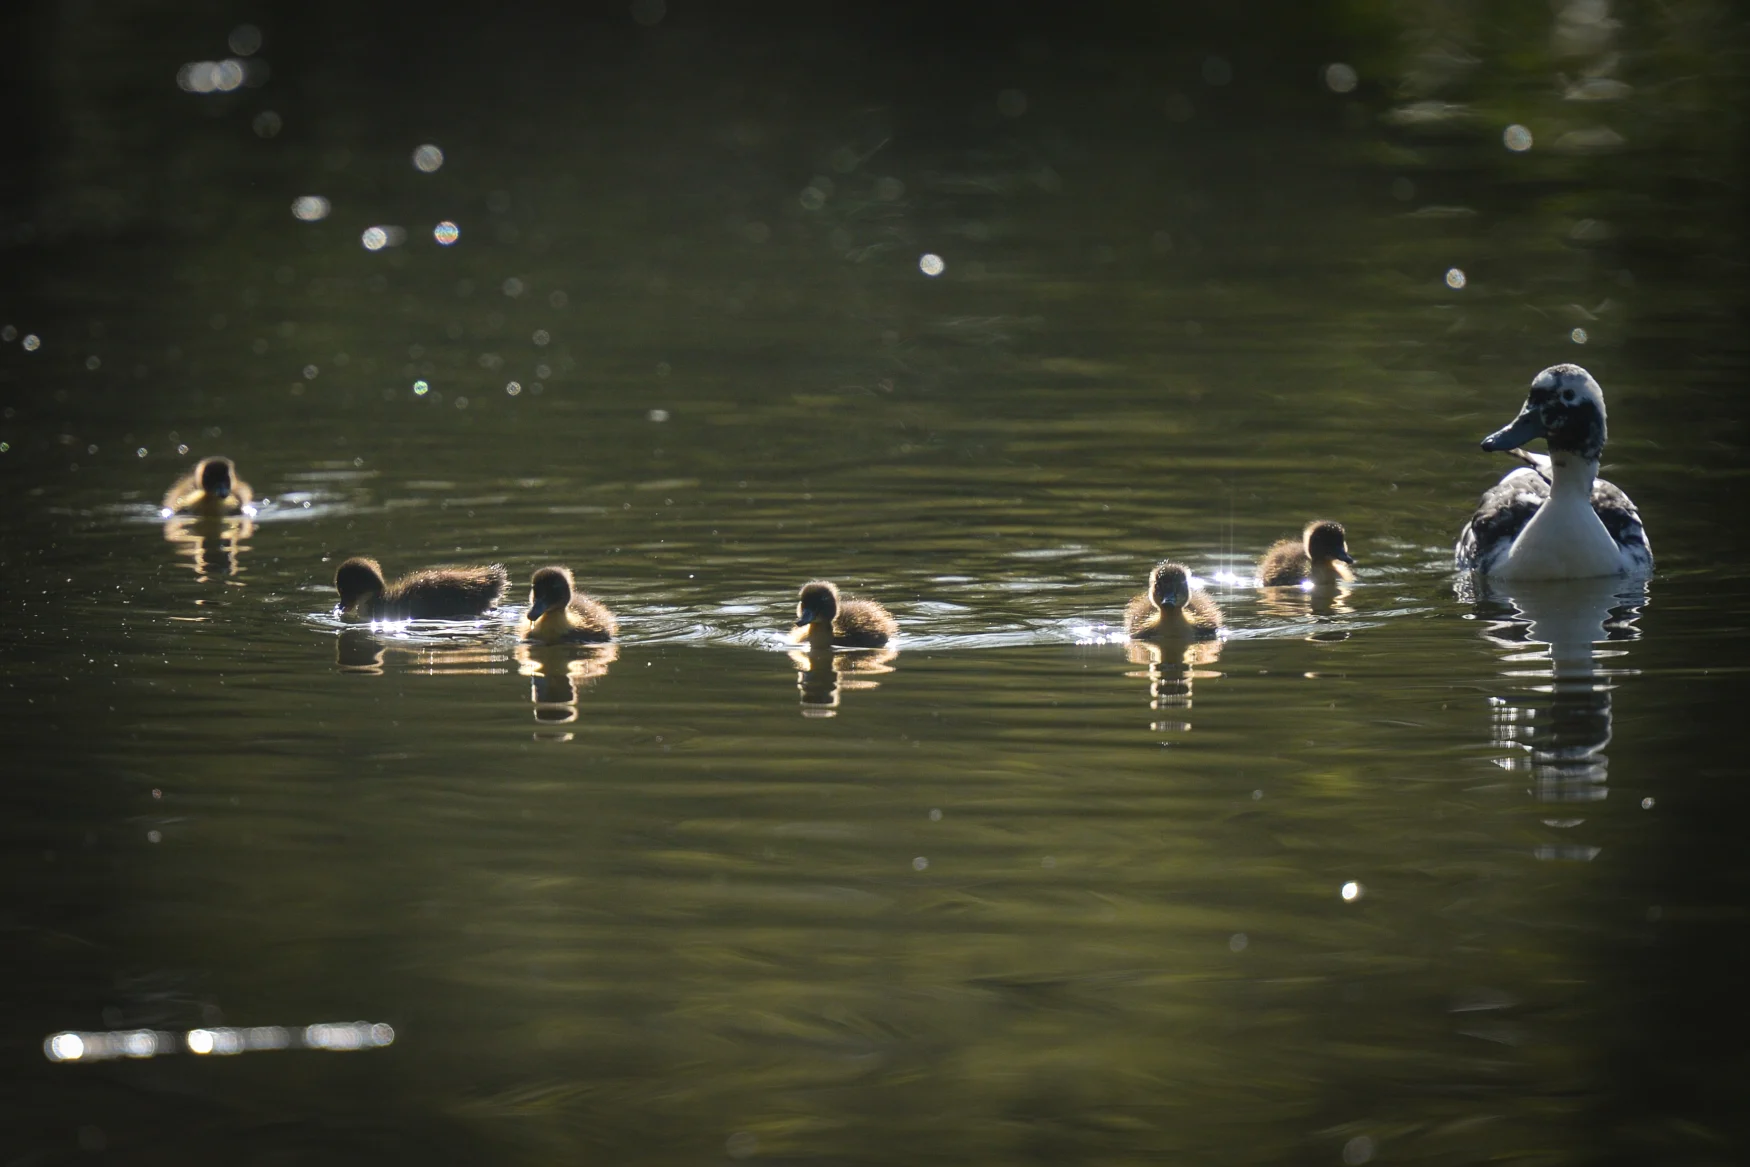 Mallard ducklings with their mother take a swim on the pond in St. Stephen's Green, in Dublin, during the COVID-19 lockdown. 
On Tuesday, 13 April 2021, in Dublin, Ireland. (Photo by Artur Widak/NurPhoto via Getty Images)